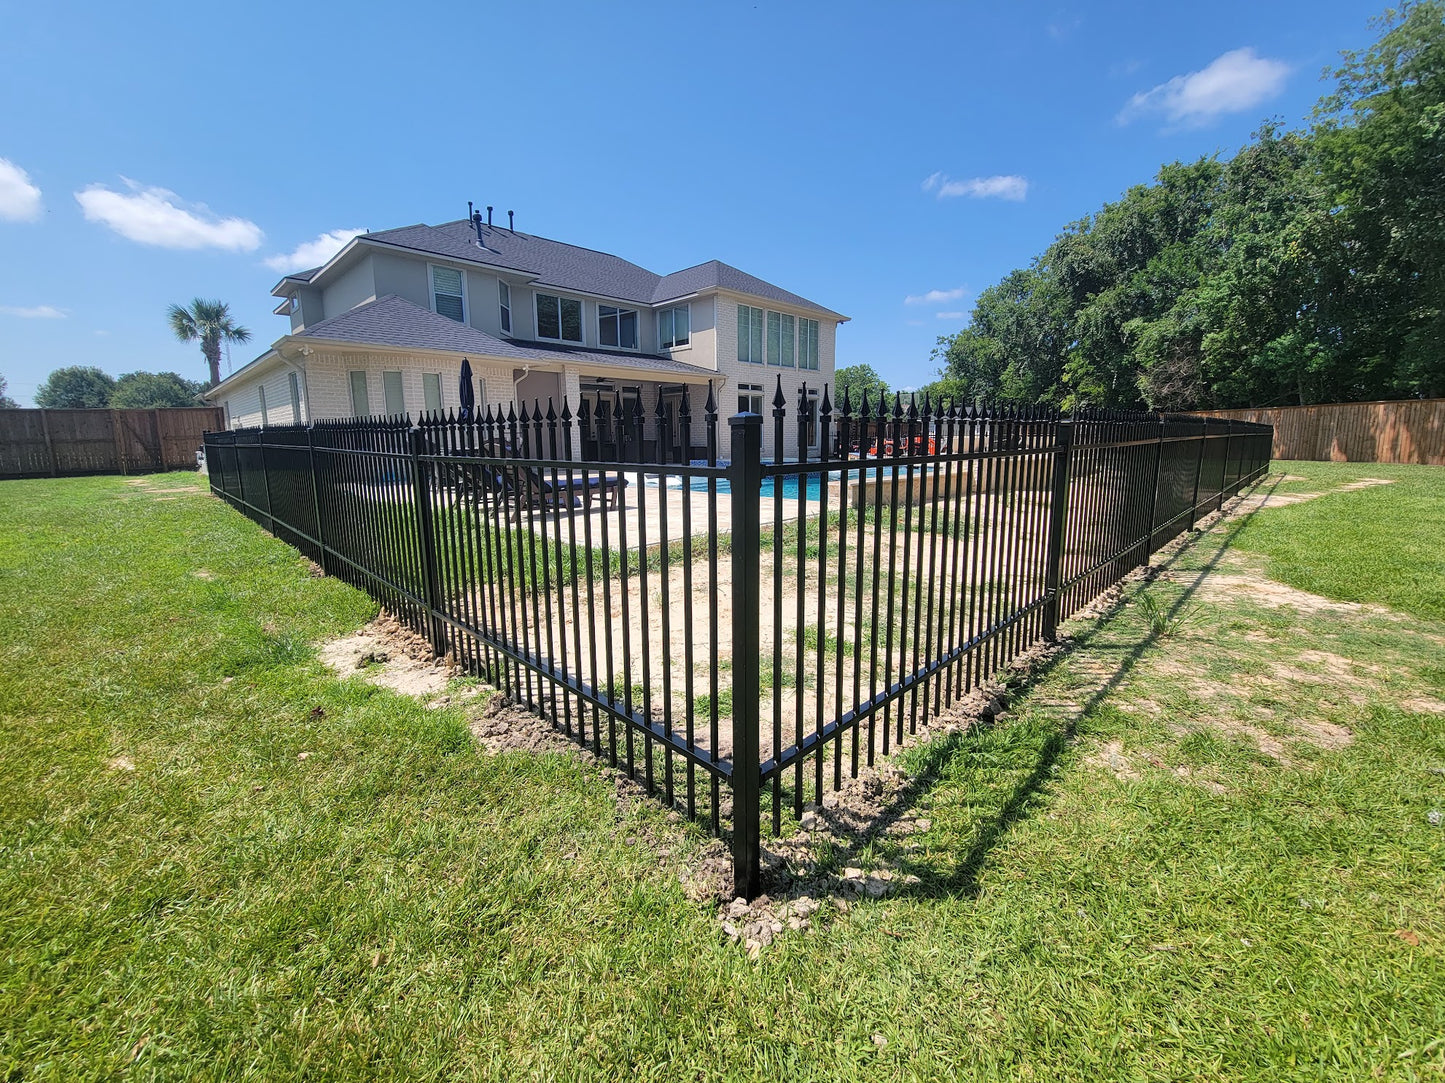 Aluminum Extended Top & Bottom Fence 4x8